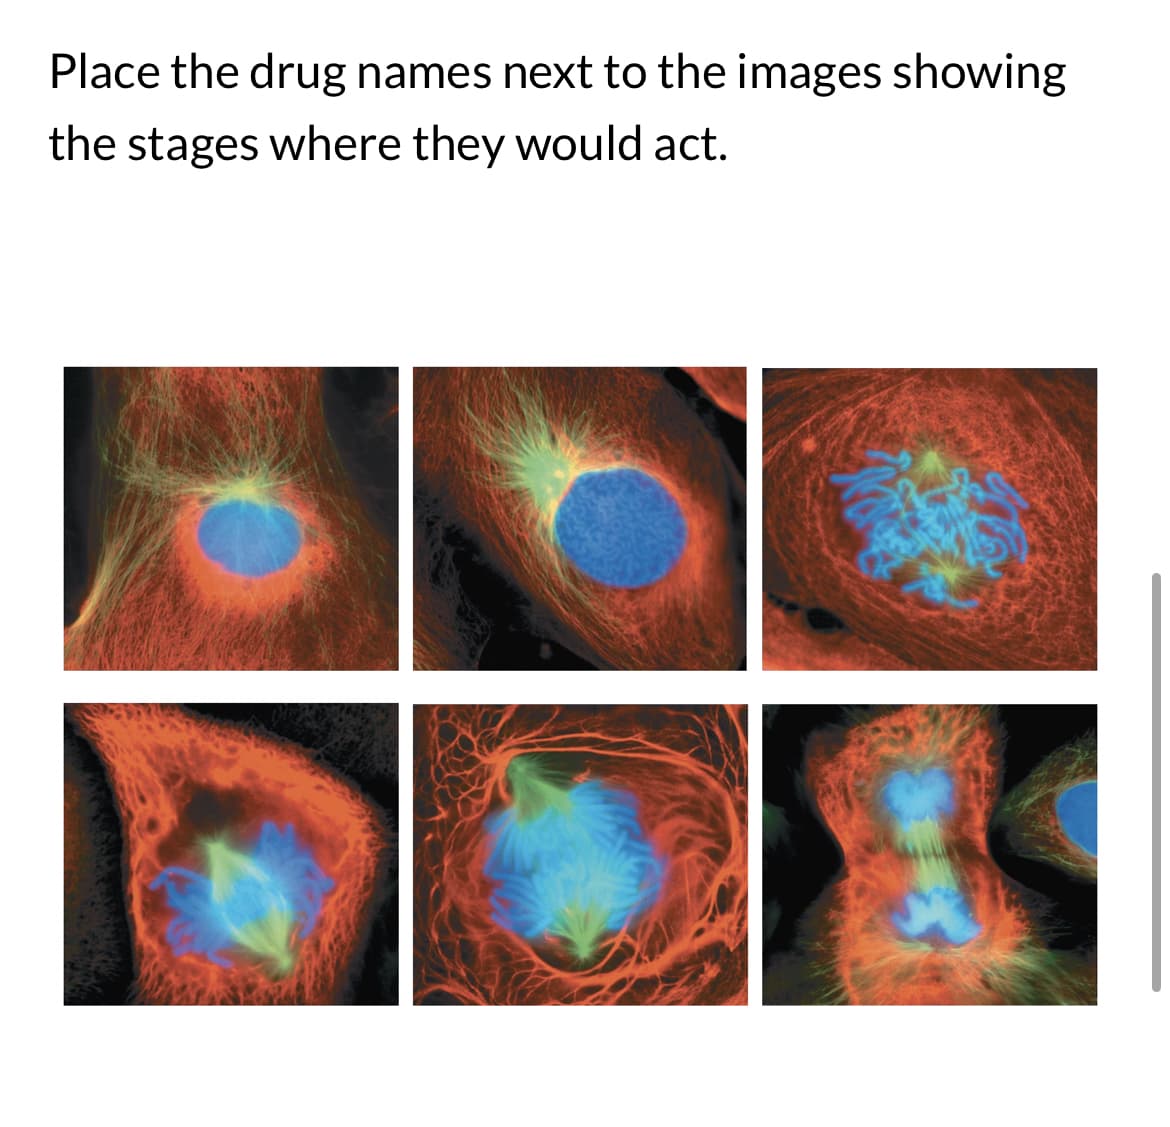 Place the drug names next to the images showing
the stages where they would act.